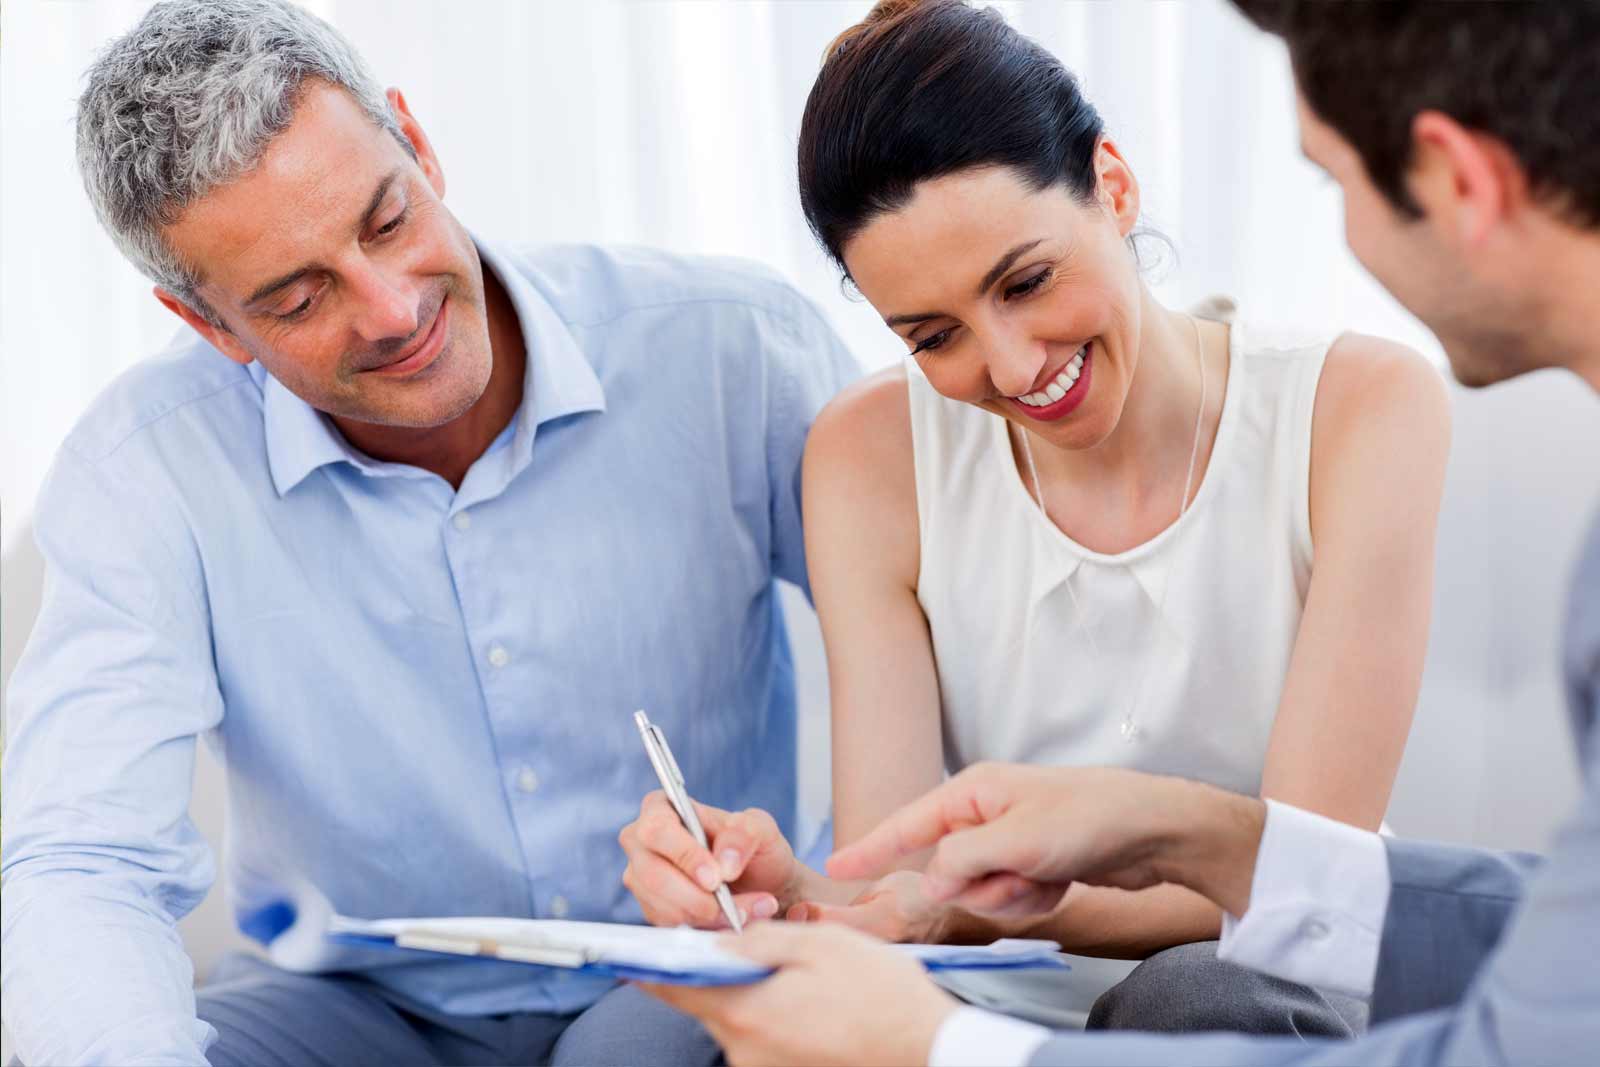 The fundamentals of Estate Planning: How to protect your family’s future